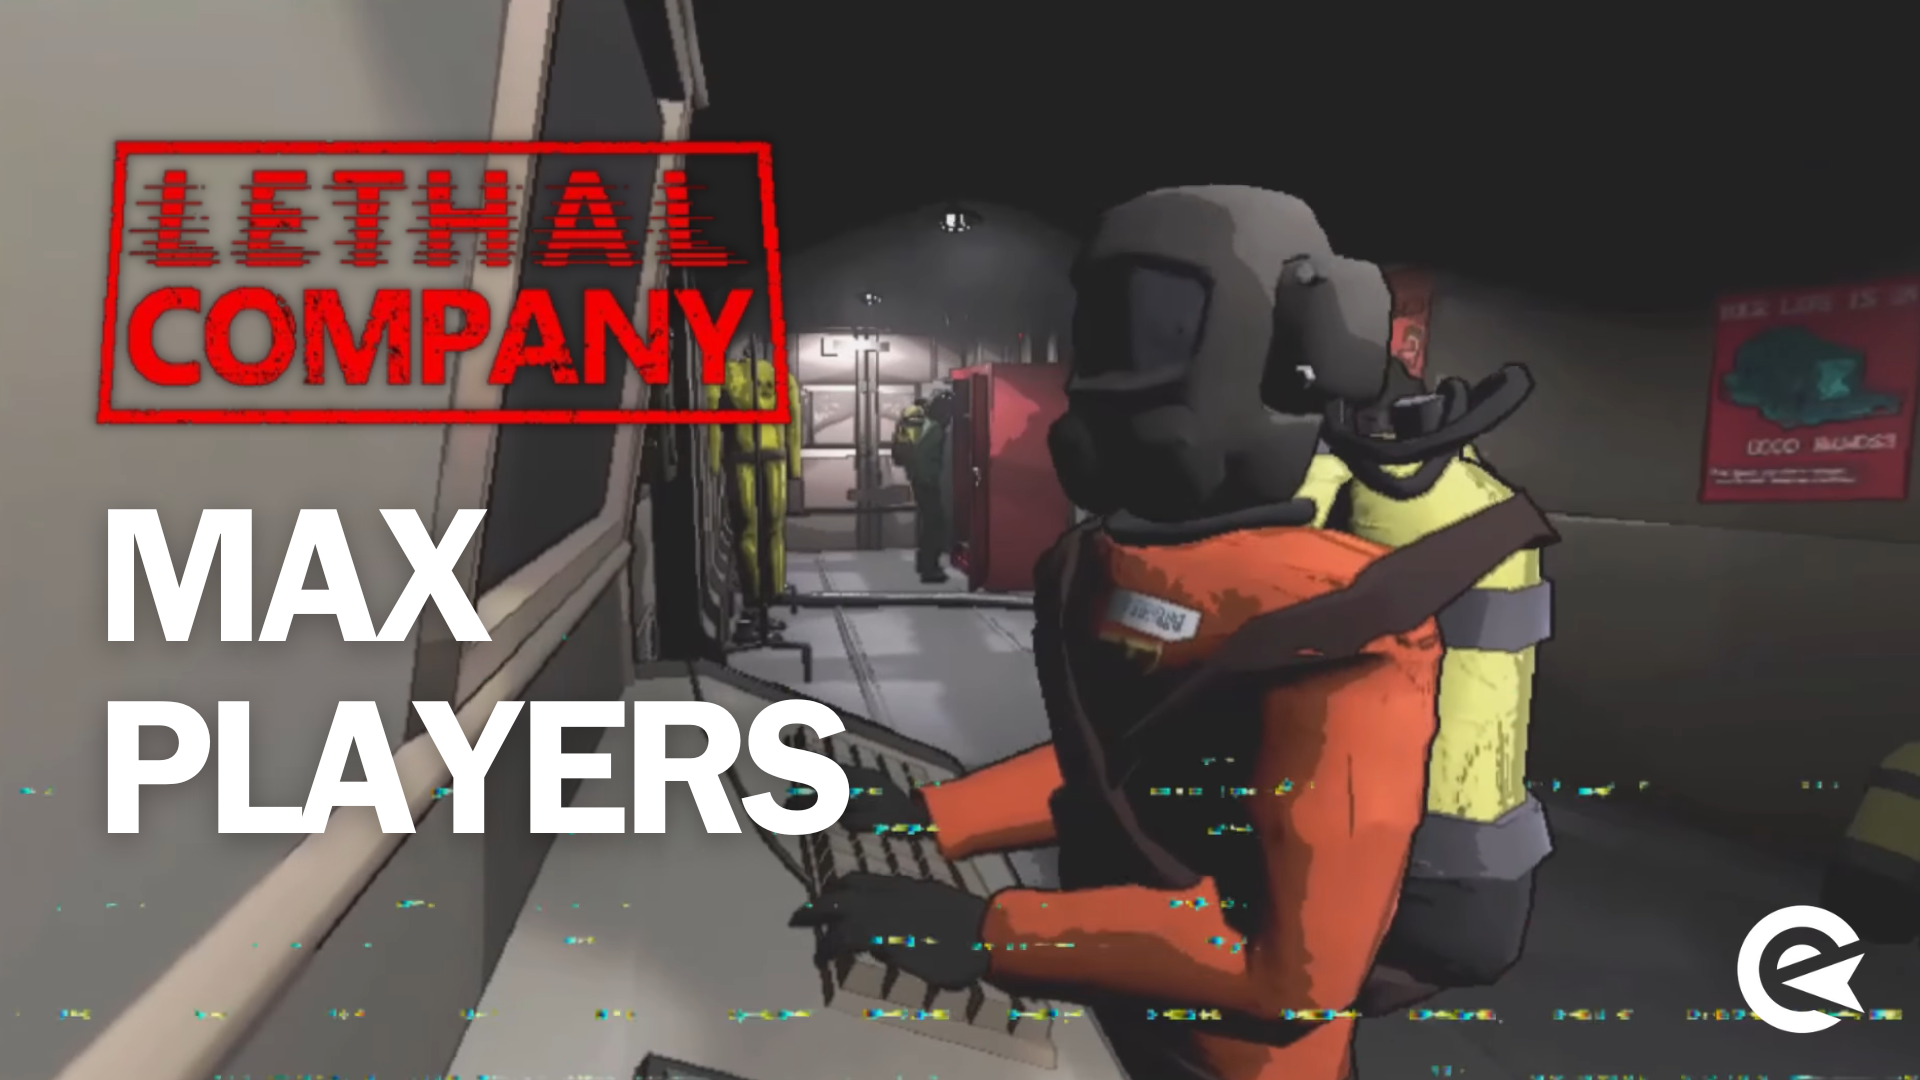 Lethal Company Max Players: How Many People Can Play?